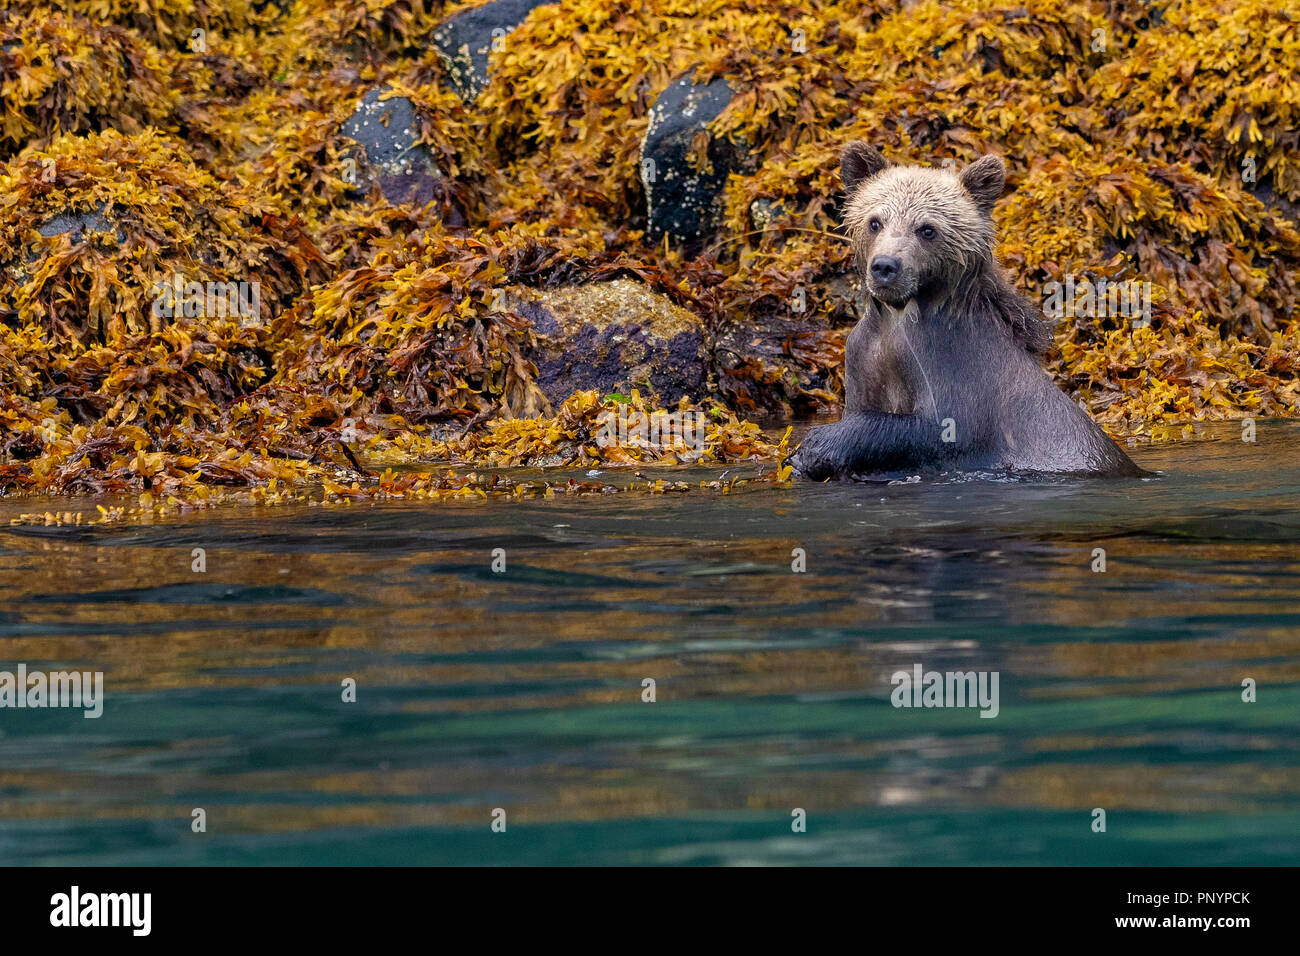 Cute 1/2 year old grizzly bear cub (Ursus arctos) foraging along the low tideline in Knight Inlet, First Nations Territory, Great Bear Rainforest, Bri Stock Photo